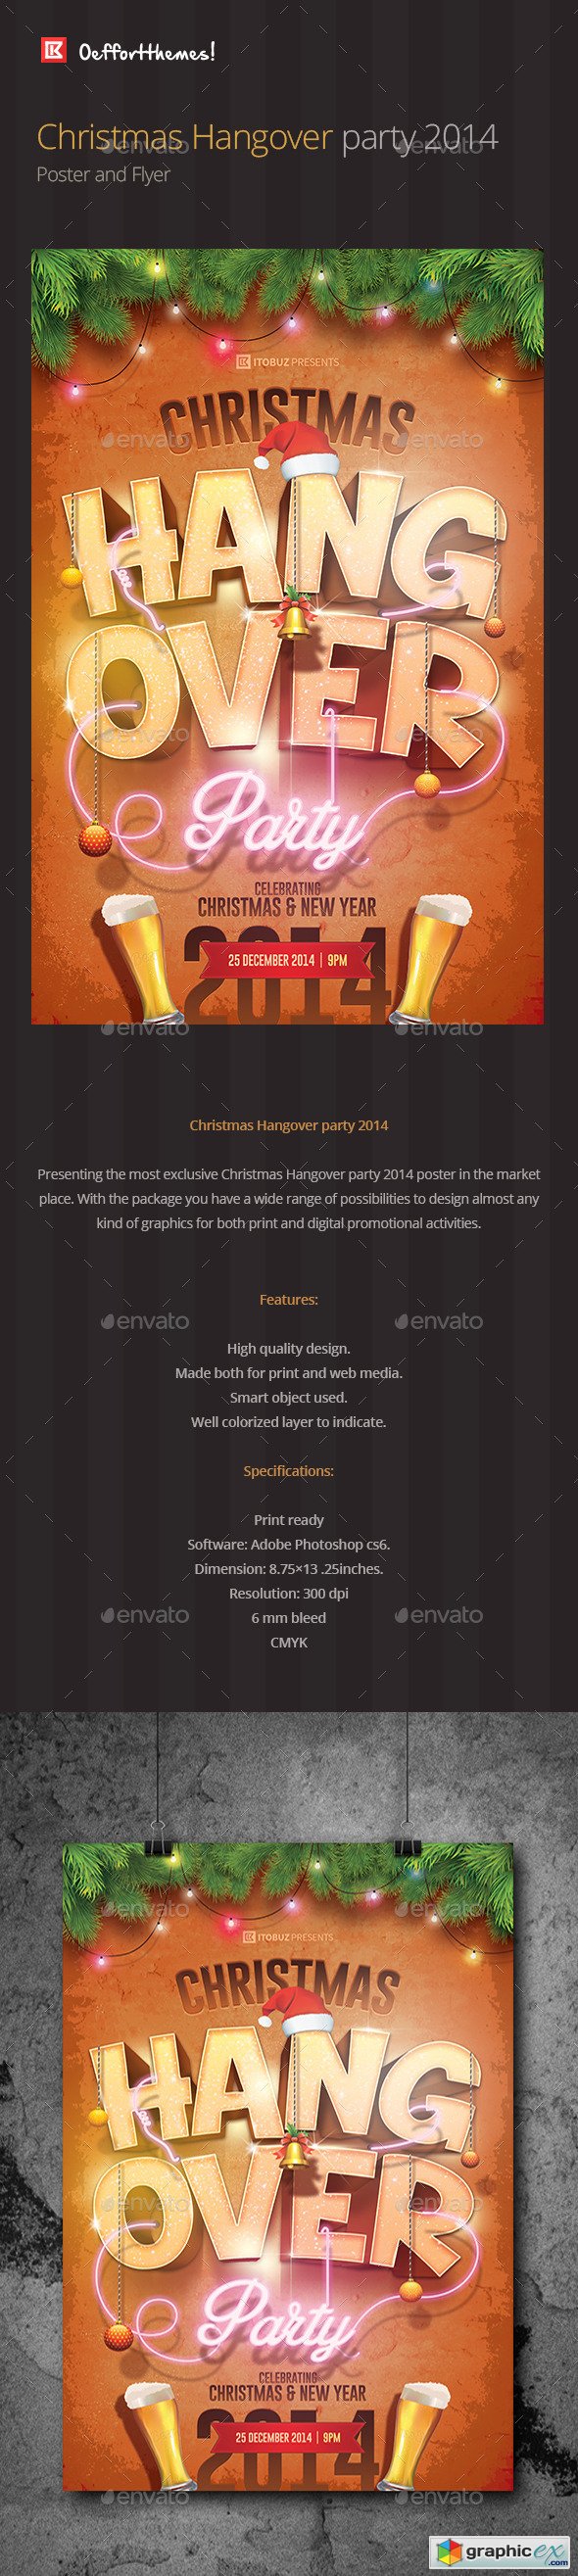 Christmas Hangover Party Poster and Flyer